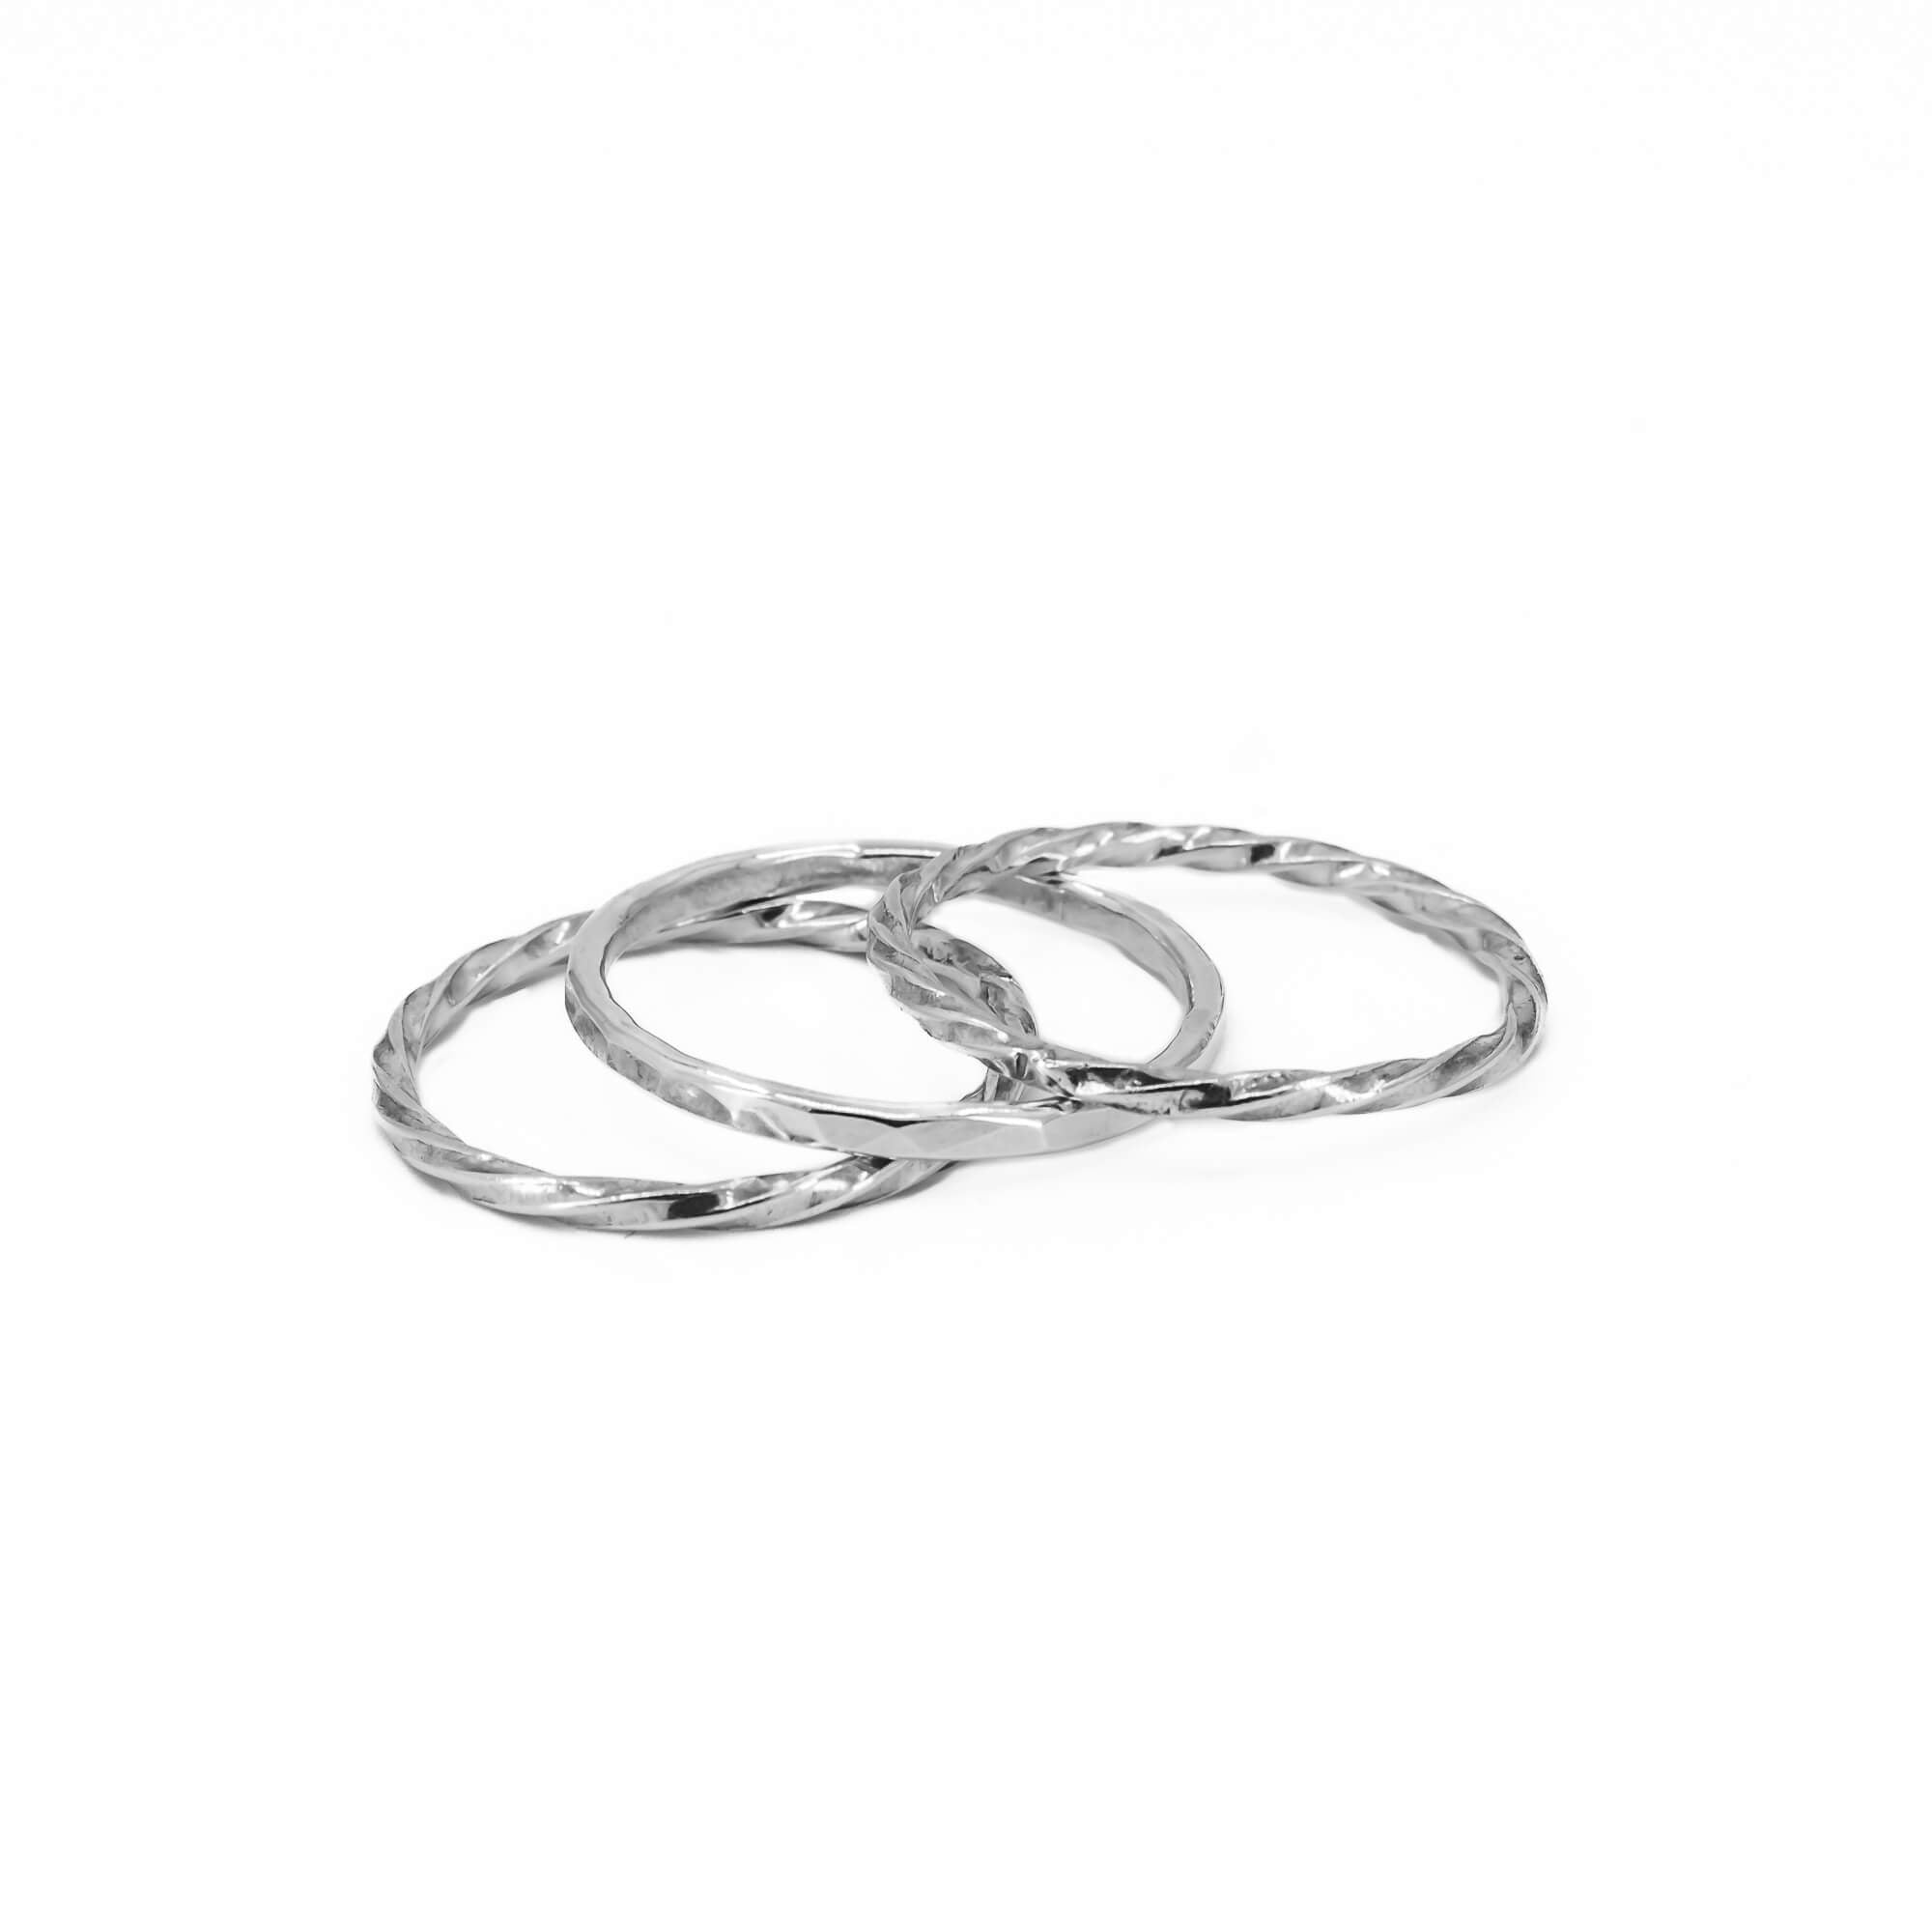 Sonara Jewelry - 3 PIECE ENGAGEMENT BRIDAL Set .925 Sterling Silver Ring  Sizes 4-12